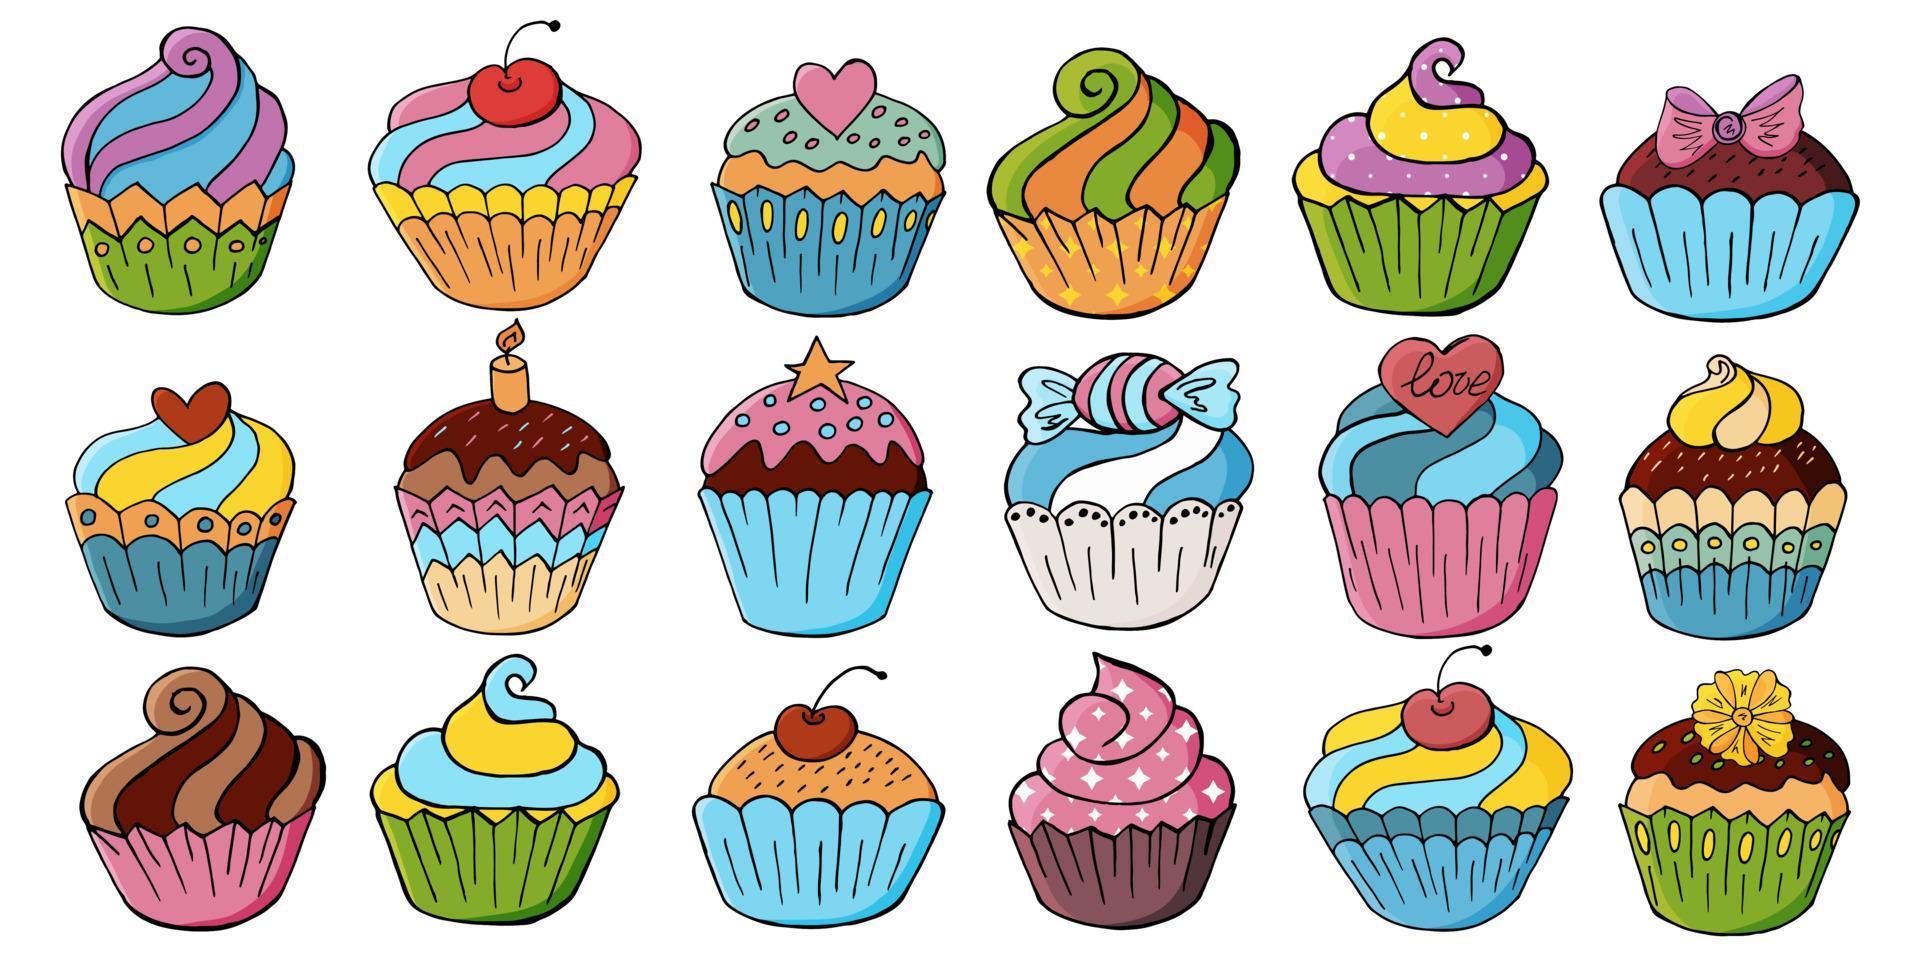 Set of icons of cupcakes, muffins in hand draw style. Collection of vector illustrations for your design. Sweet pastries, muffins